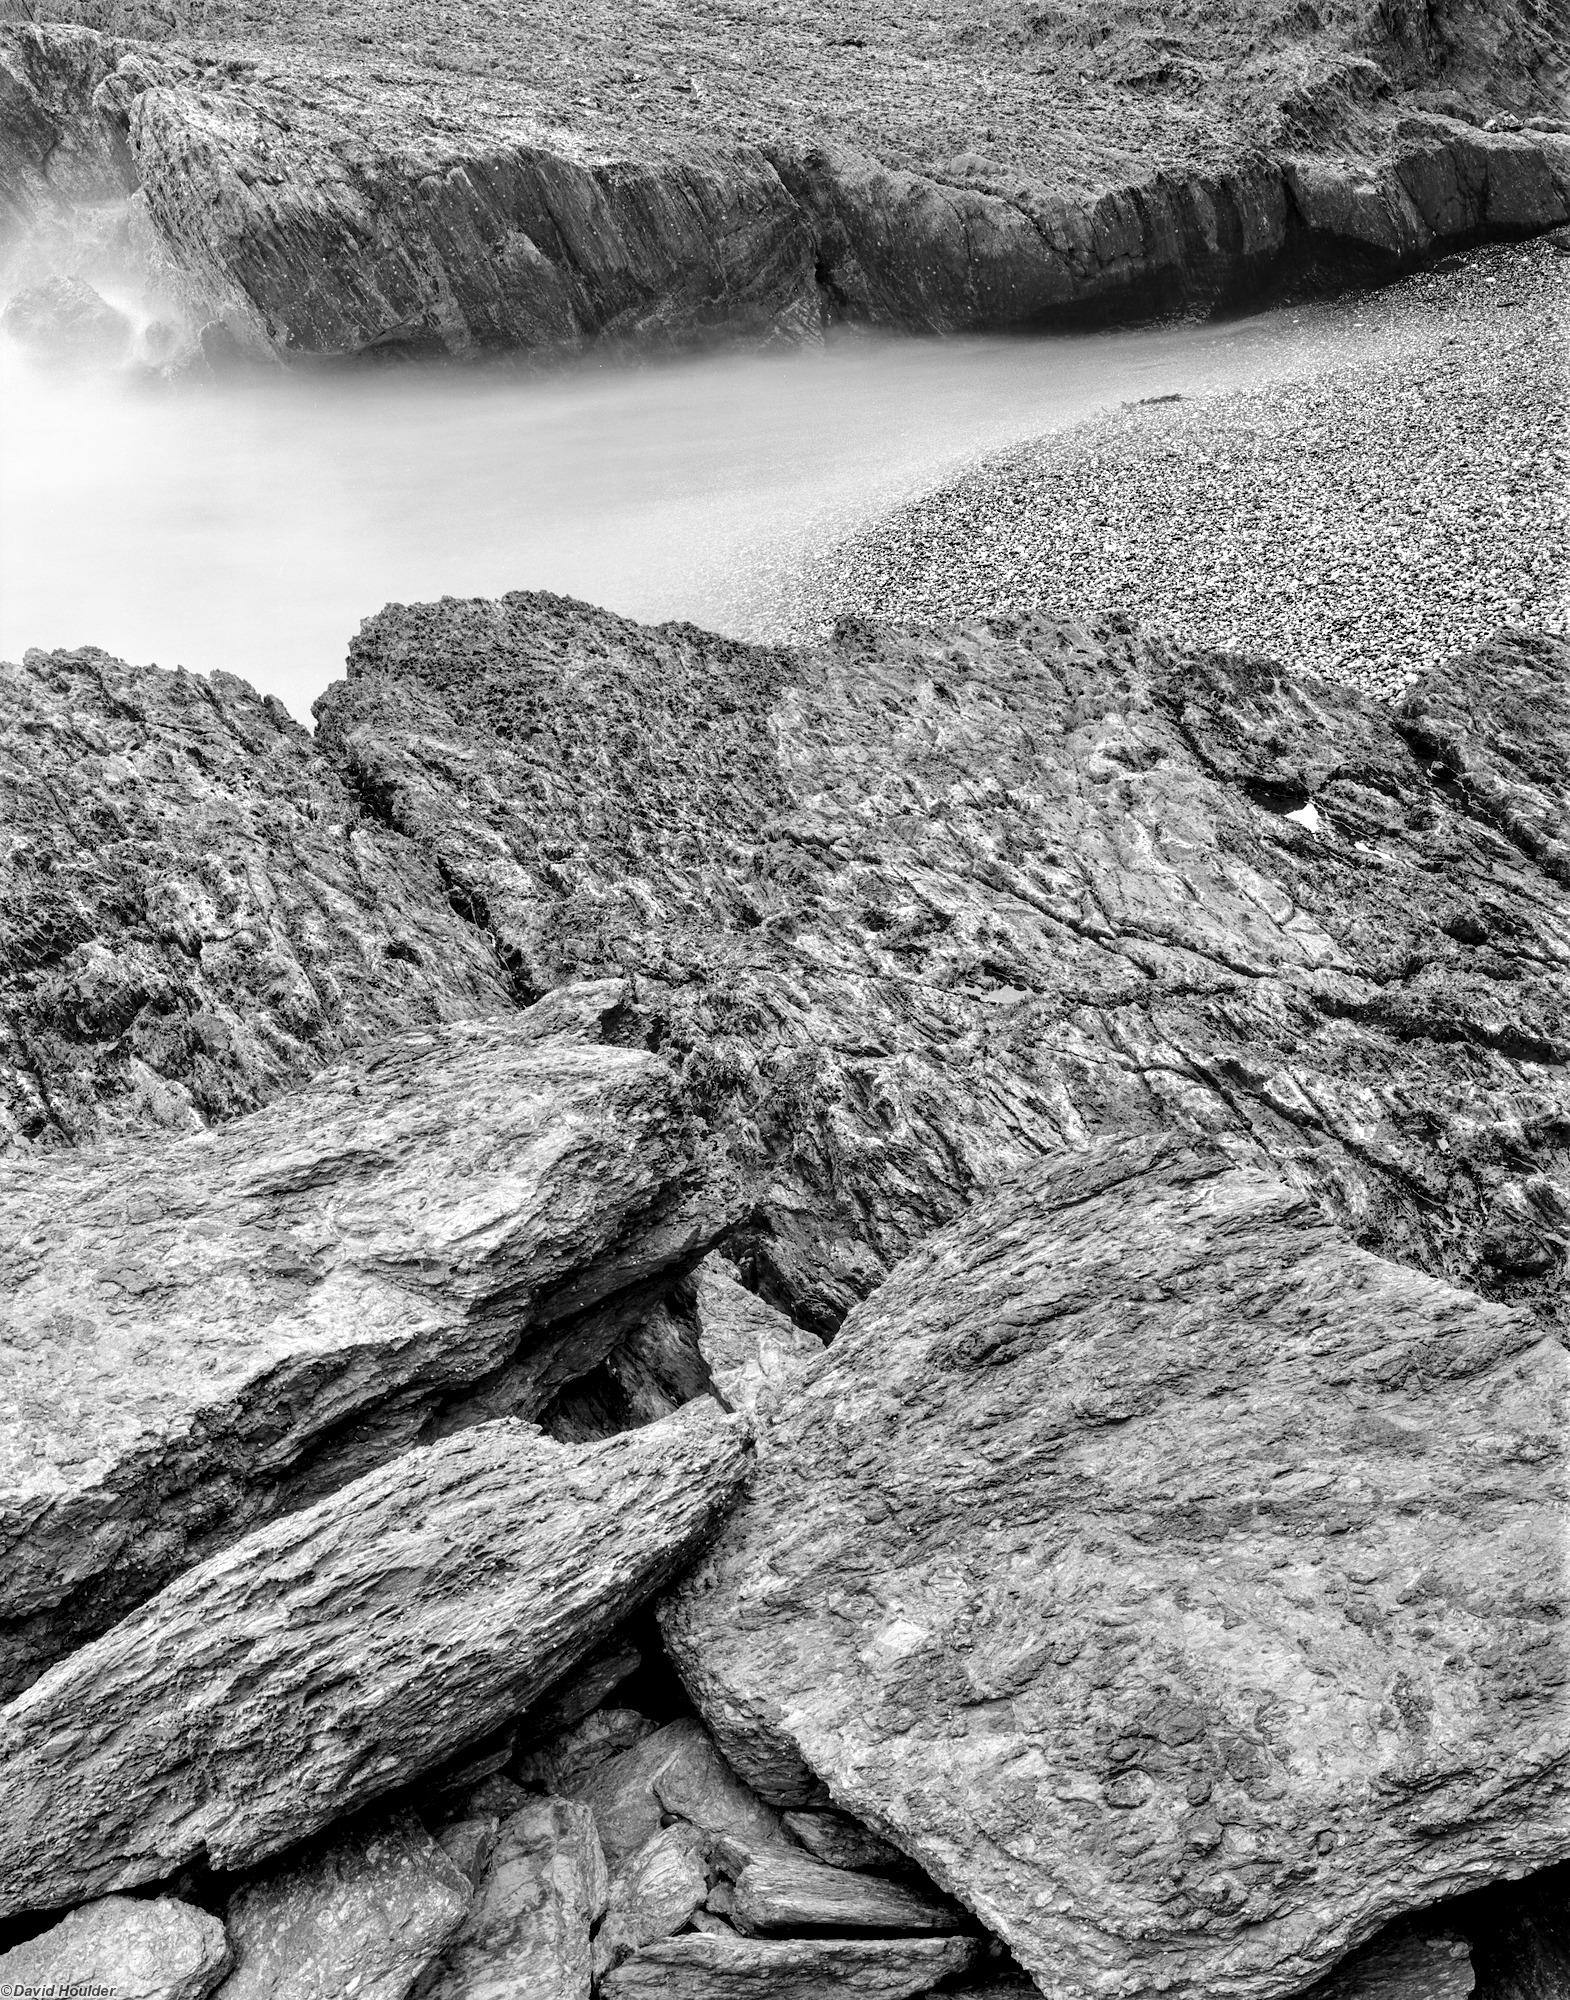 Jagged rocks, a tiny pebbly beach and motion-blurred water